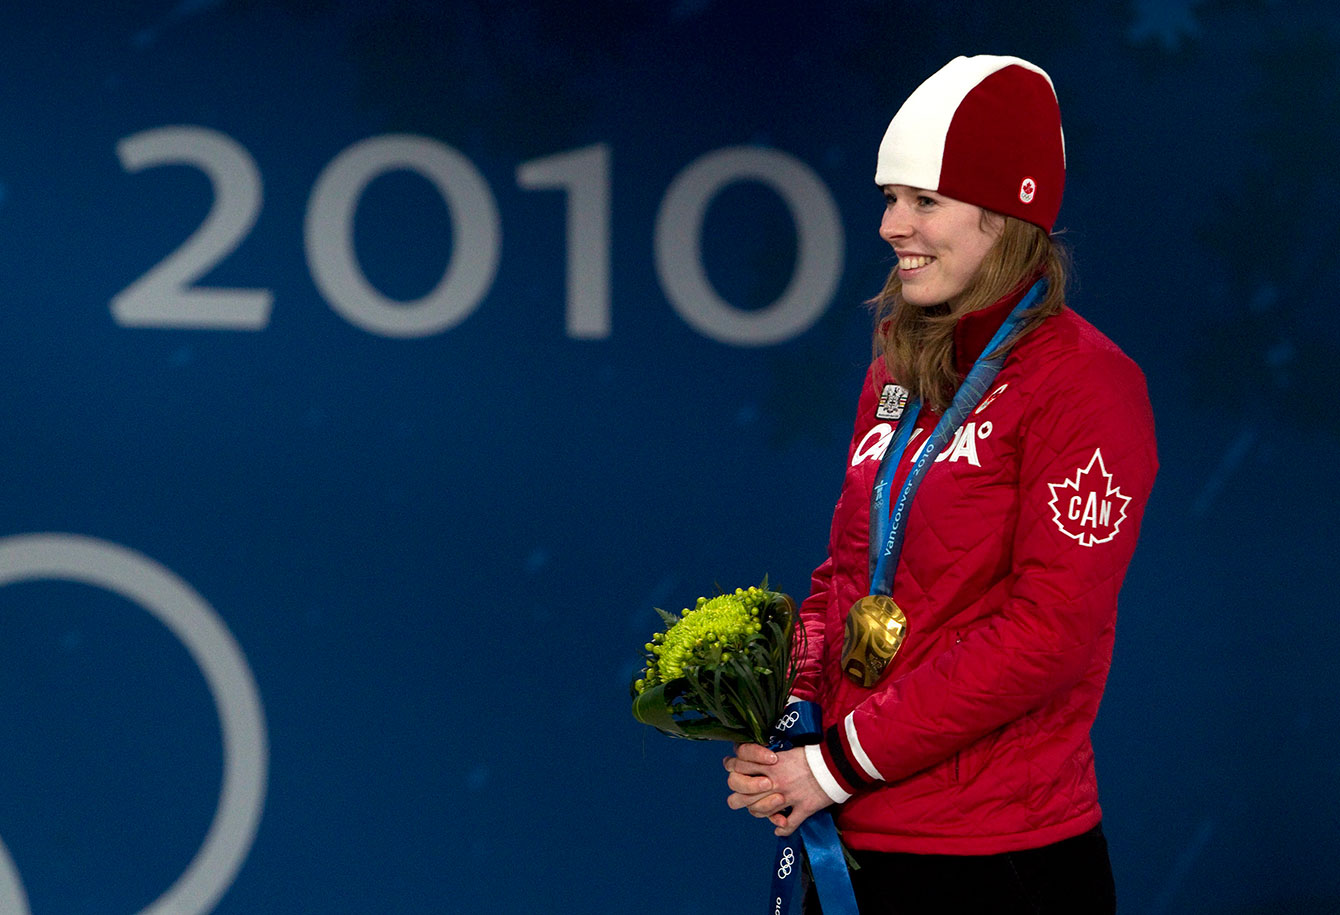 Christine Nesbitt stands on the podium at her 1000m victory ceremony, February 18th, 2010. 